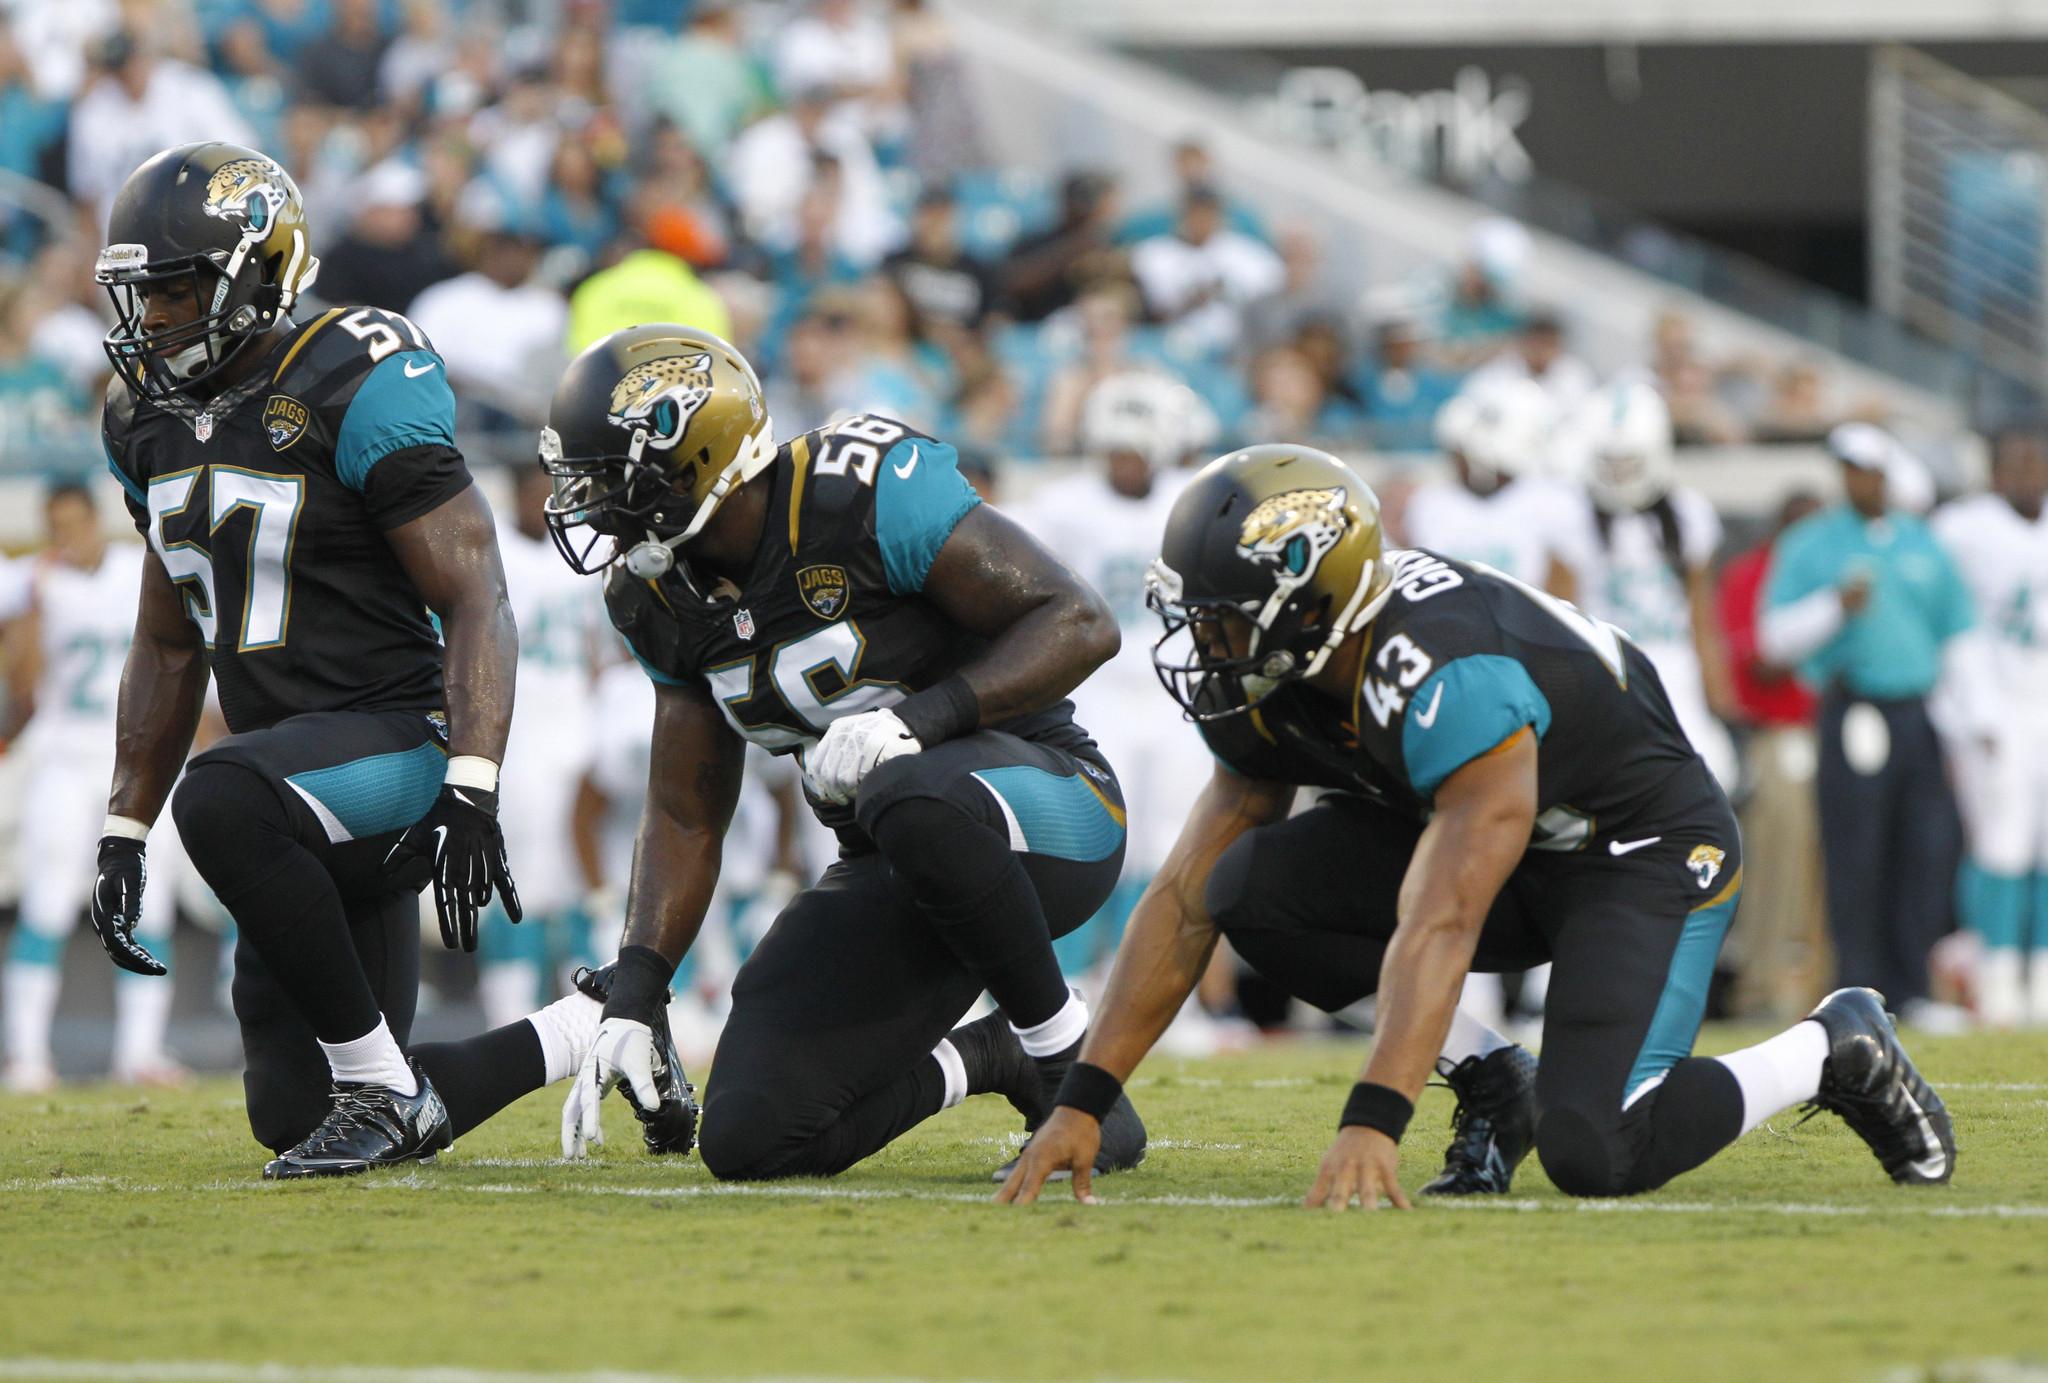 Jacksonville Jaguars Articles, Photos, and Videos - The Morning Call2048 x 1383